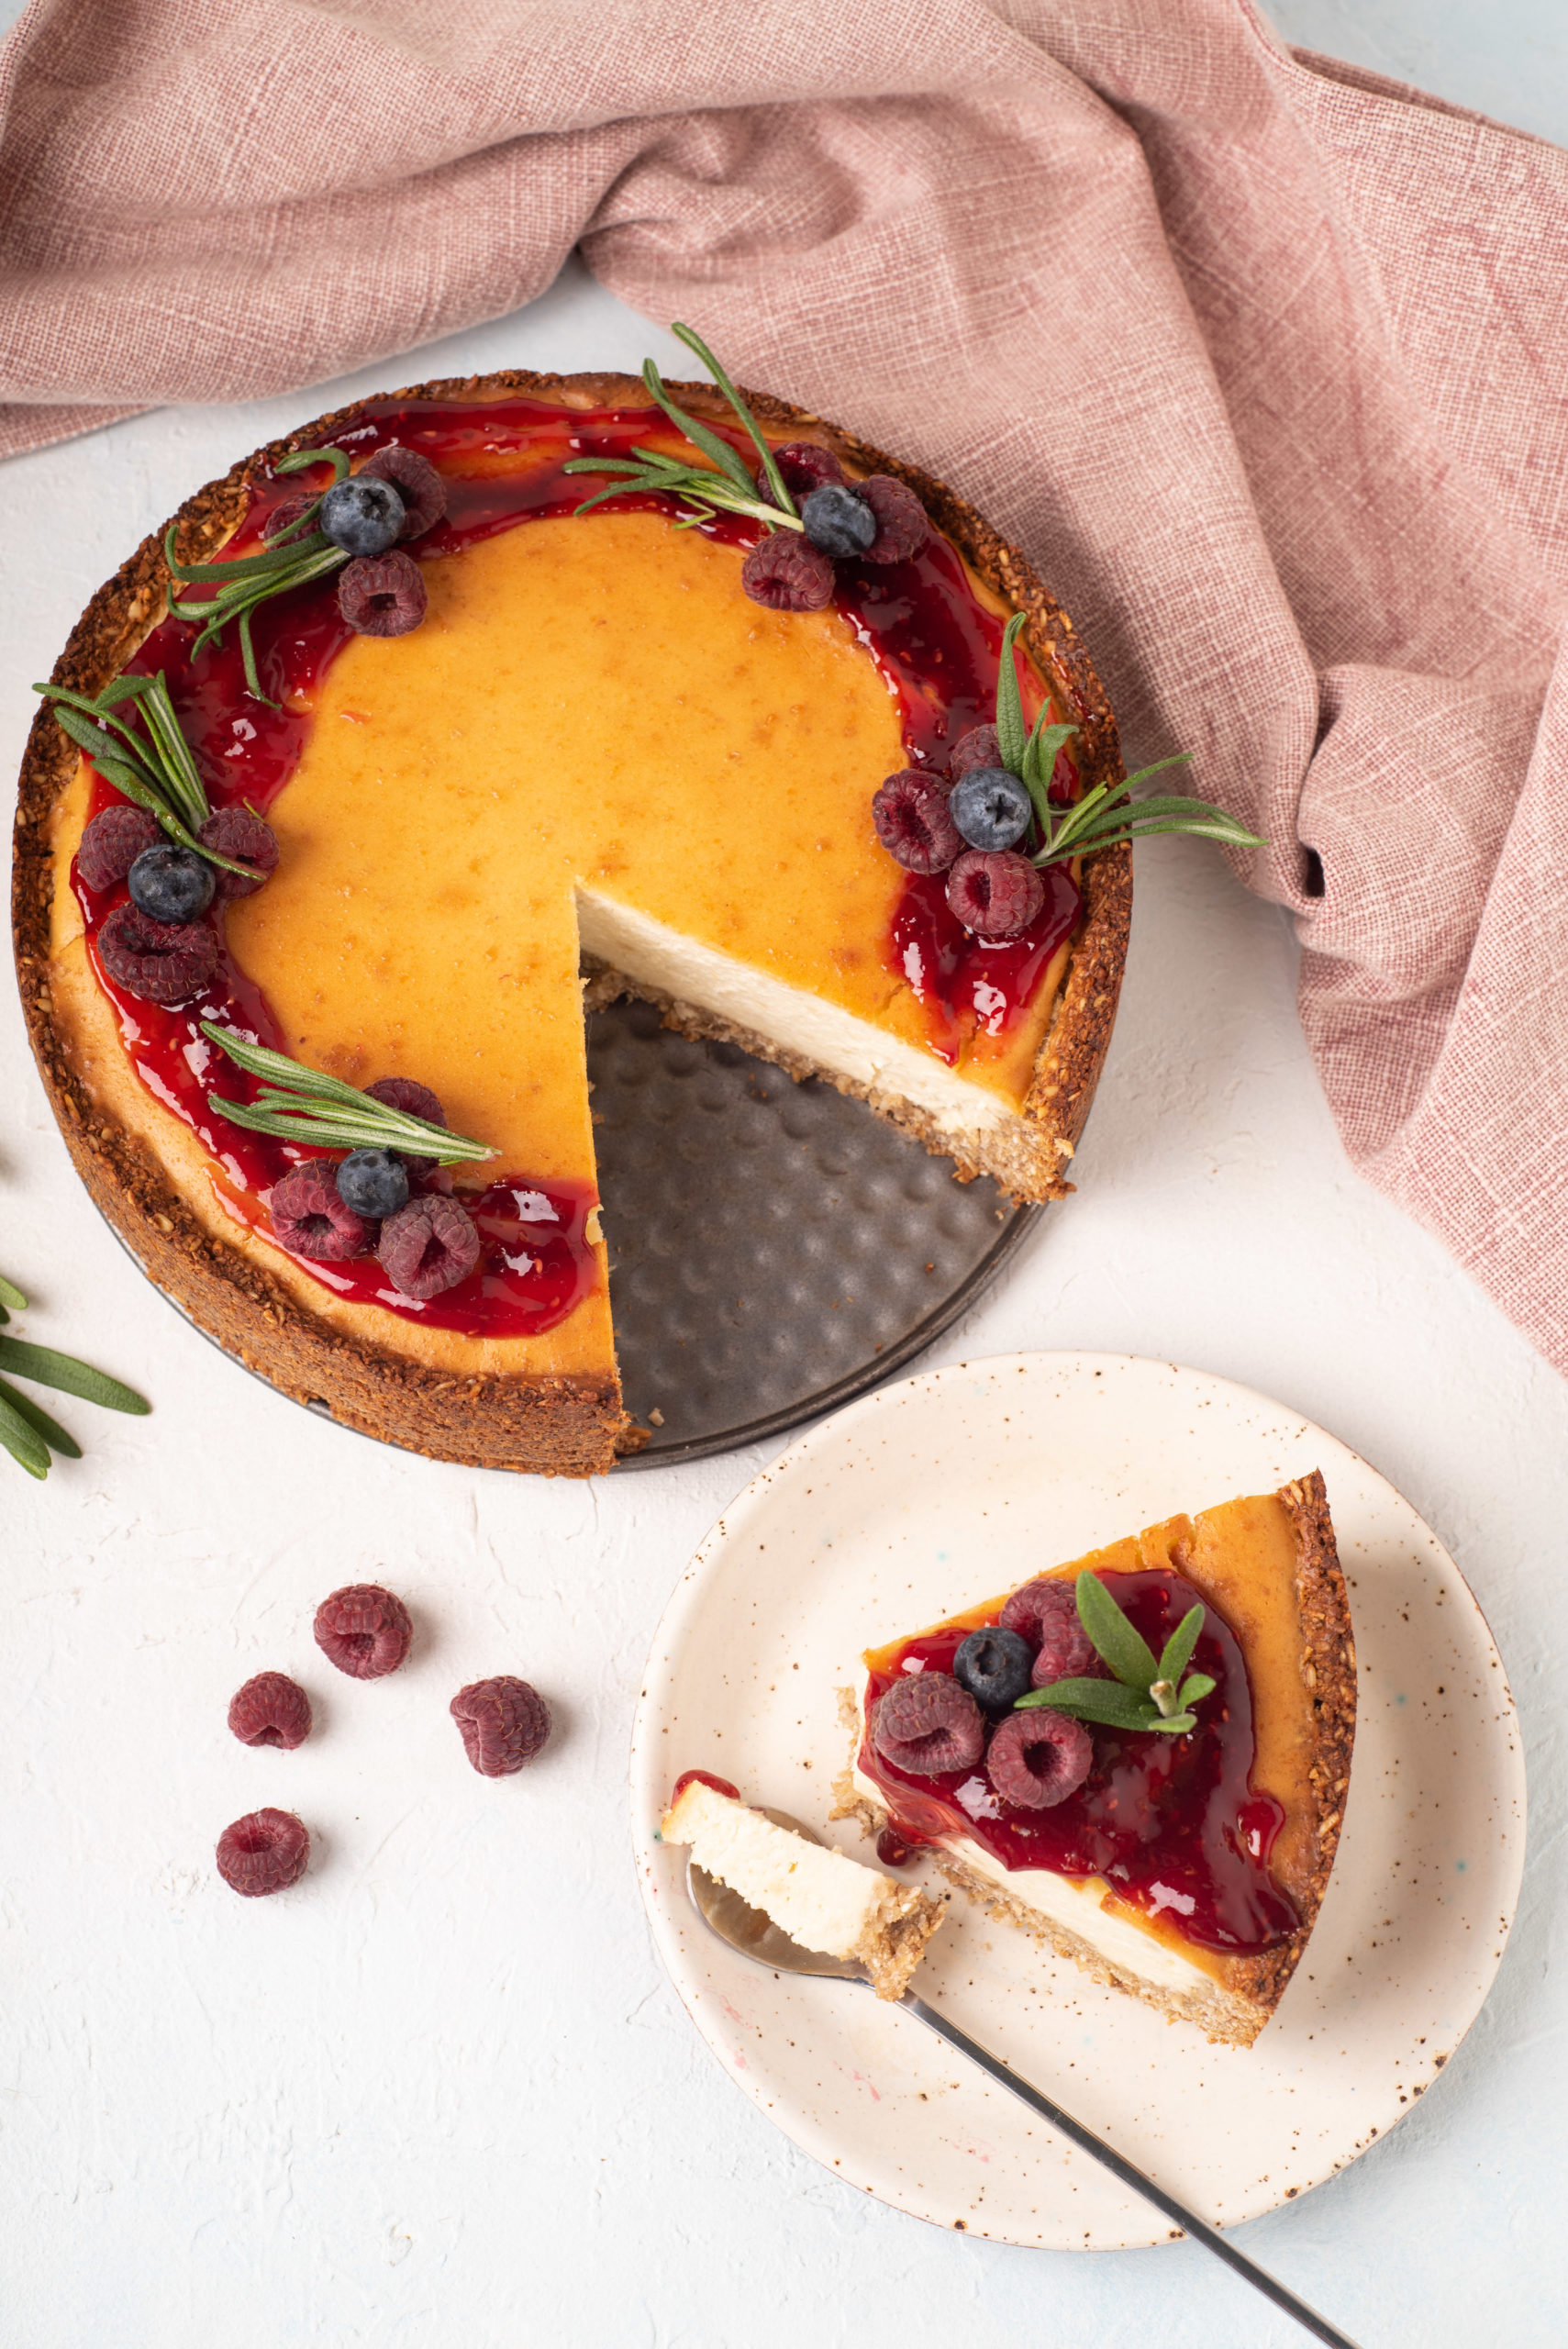 Can You Believe This Cheesecake Is Made With Tofu?!